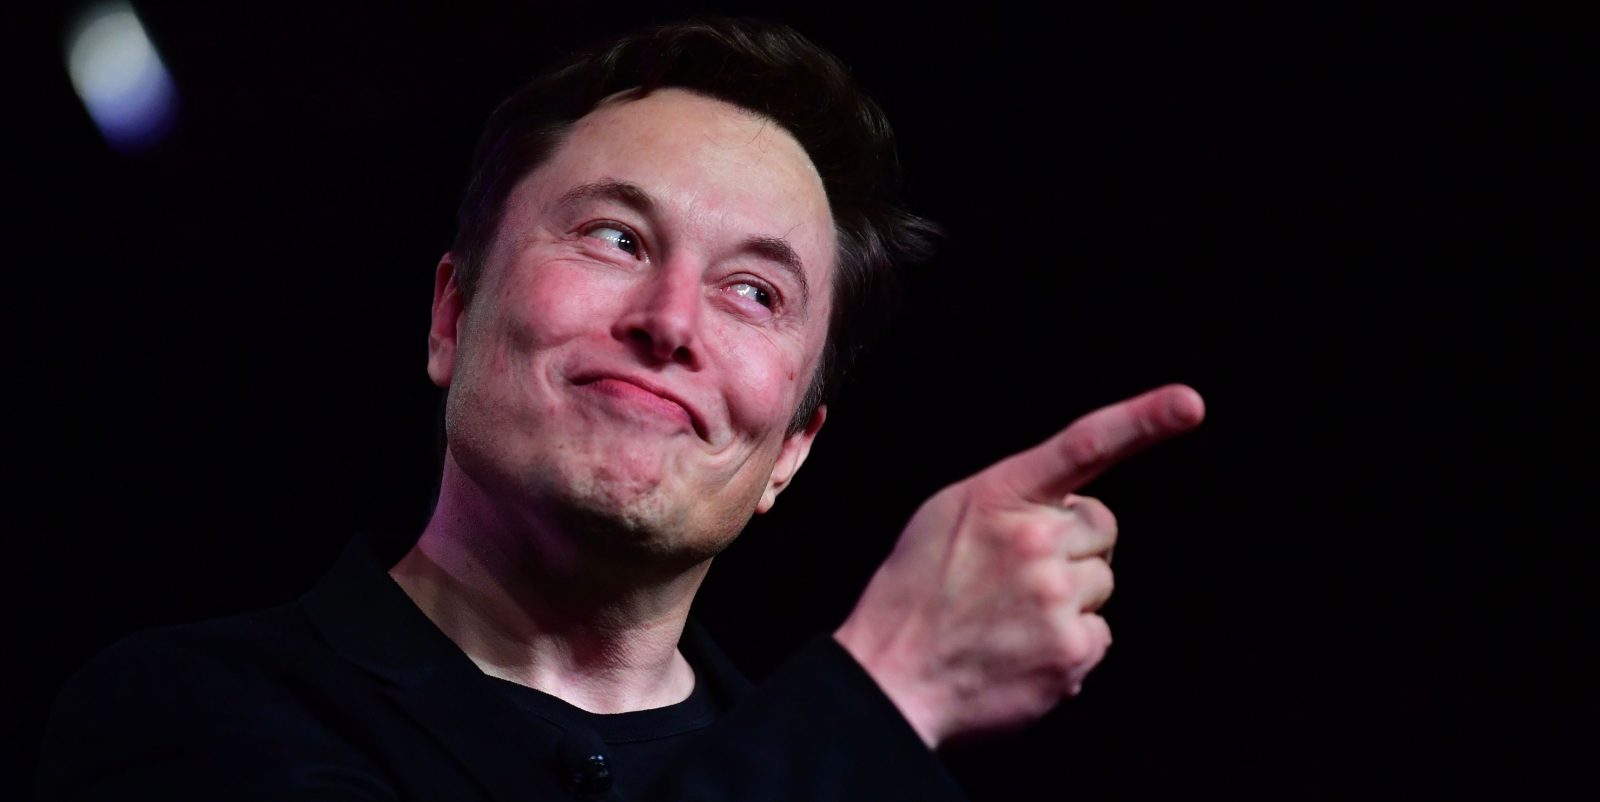 Elon Musk officially says he’s giving up on Twitter acquisition deal